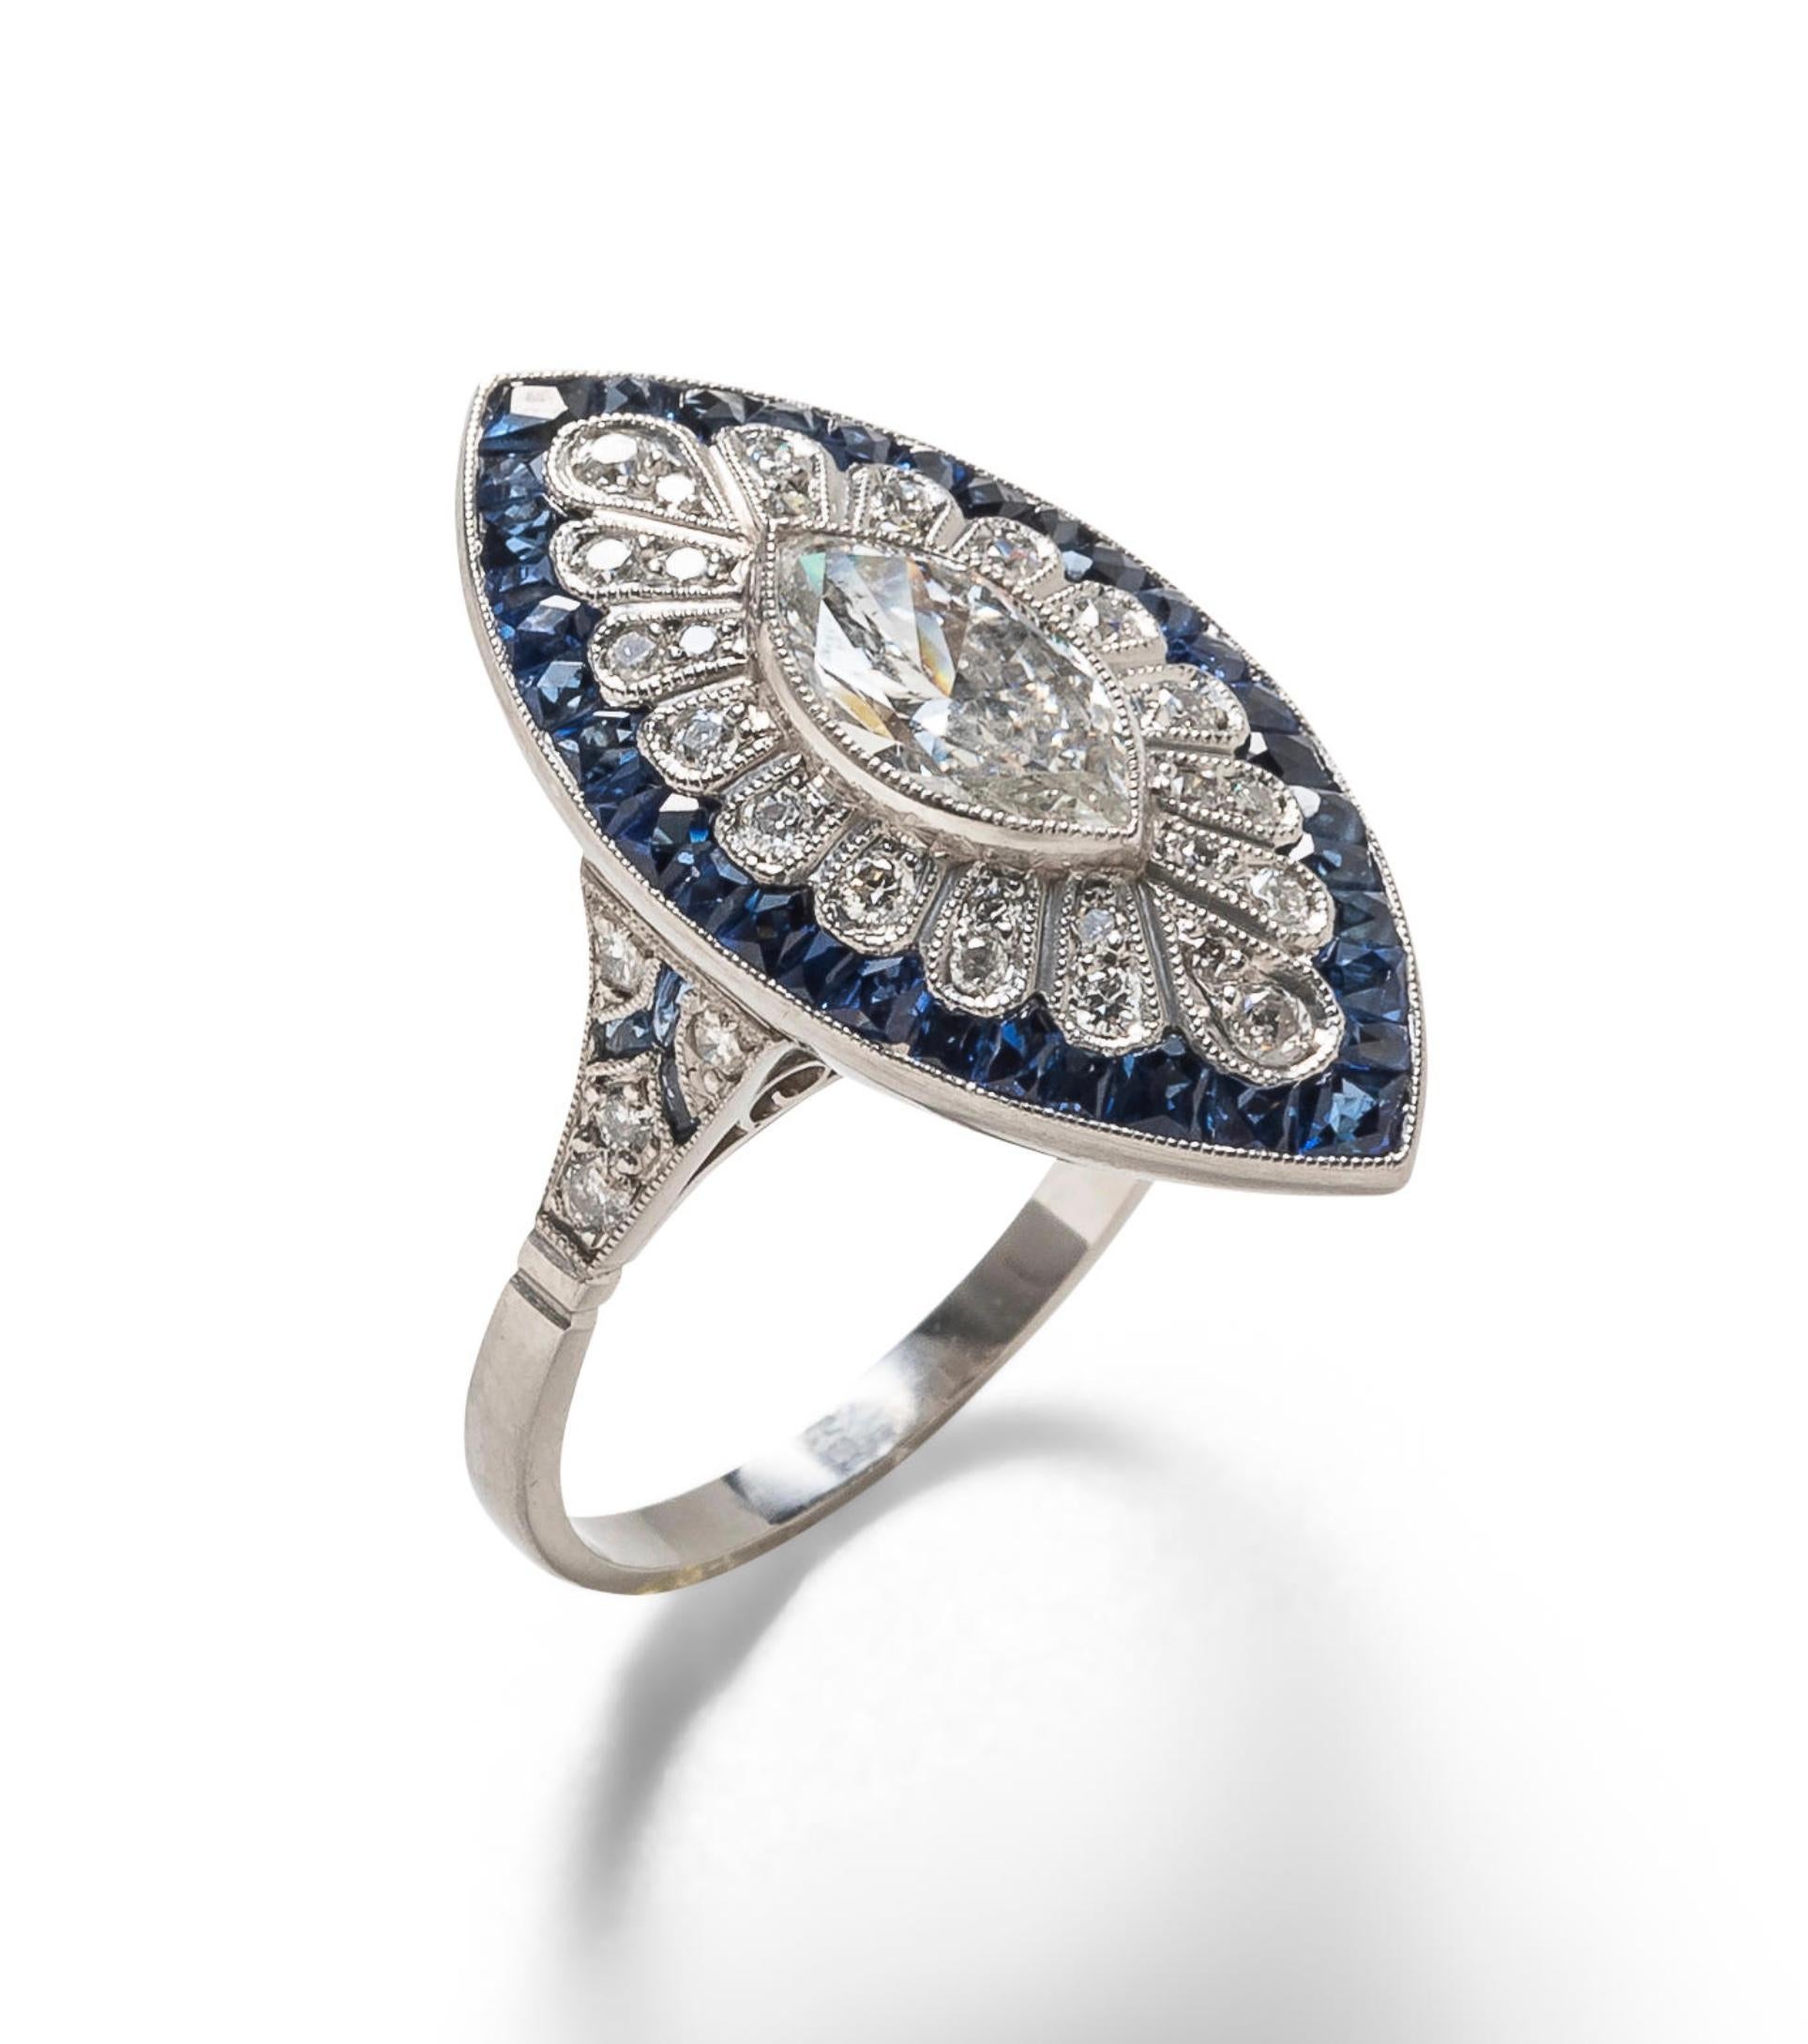 Platinum marquise diamond ring

Bezel-set marquise-cut diamond of approximately 1 carat, framed by circular-cut diamonds and calibre-cut sapphires, millegrain accents; platinum 

Size: 7.5 US; head width 0.5 inch, length 1 inch 
Total weight: 7.3